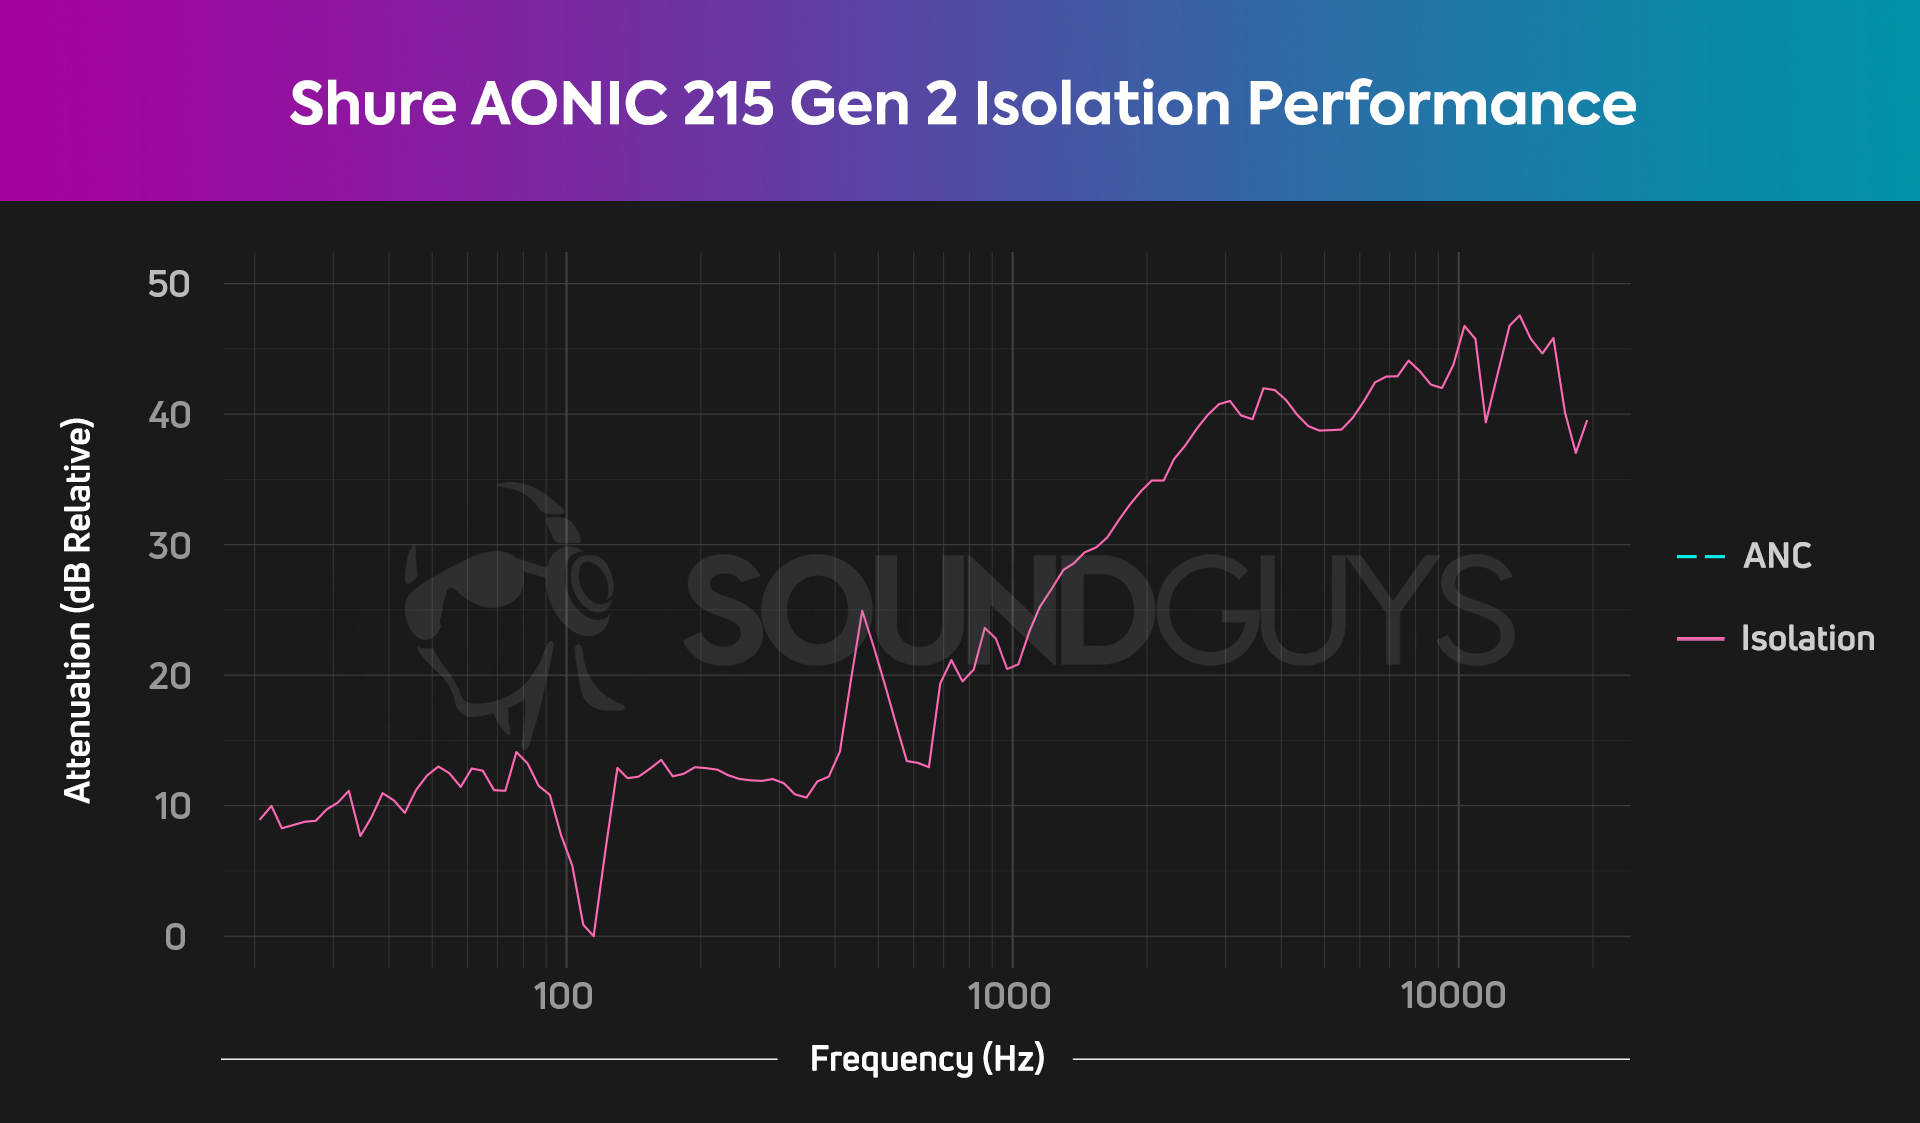 Chart of Shure AONIC 215 Gen 2 isolation performance.